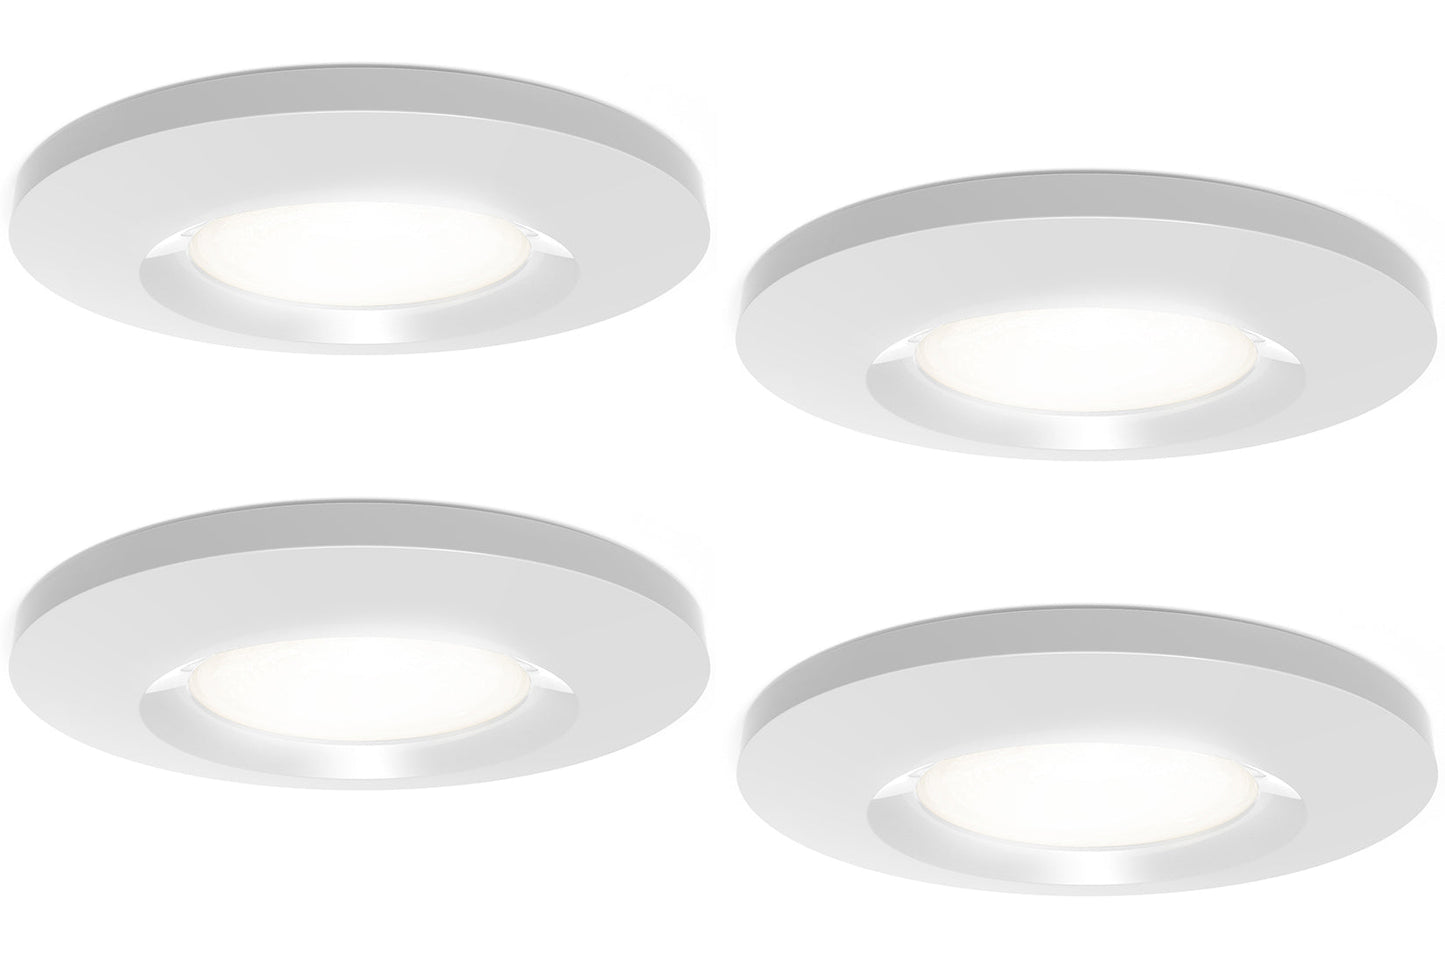 4lite IP65 3000K Dimmable LED Fire-Rated Downlight - Matte White - maplin.co.uk